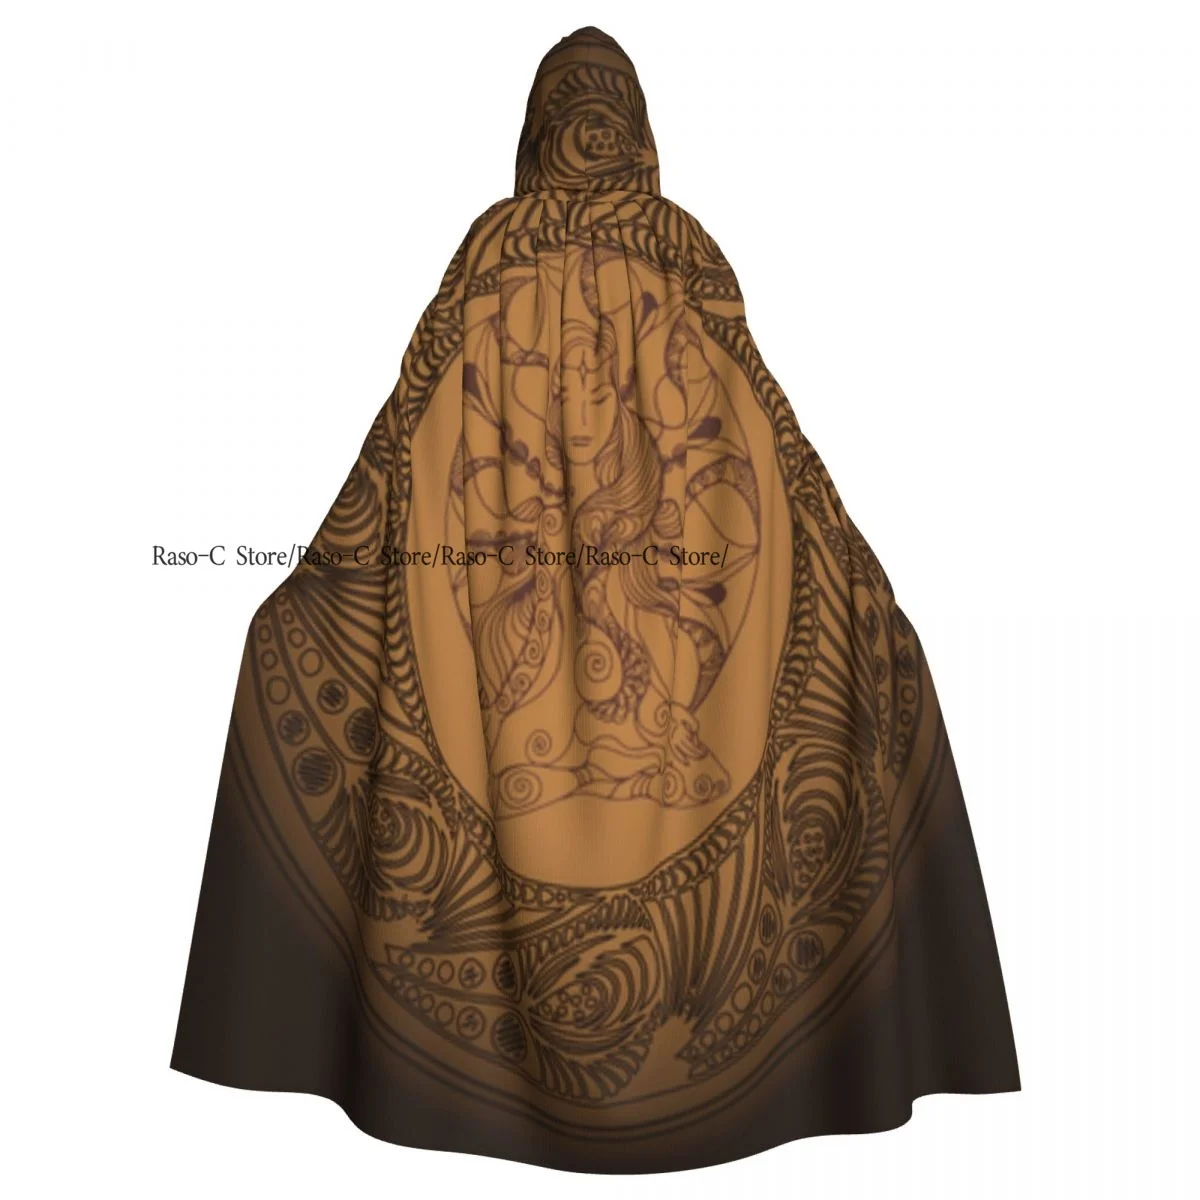 

Hooded Cloak Unisex Cloak with Hood Woman Practices Yoga Cloak Vampire Witch Cape Cosplay Costume